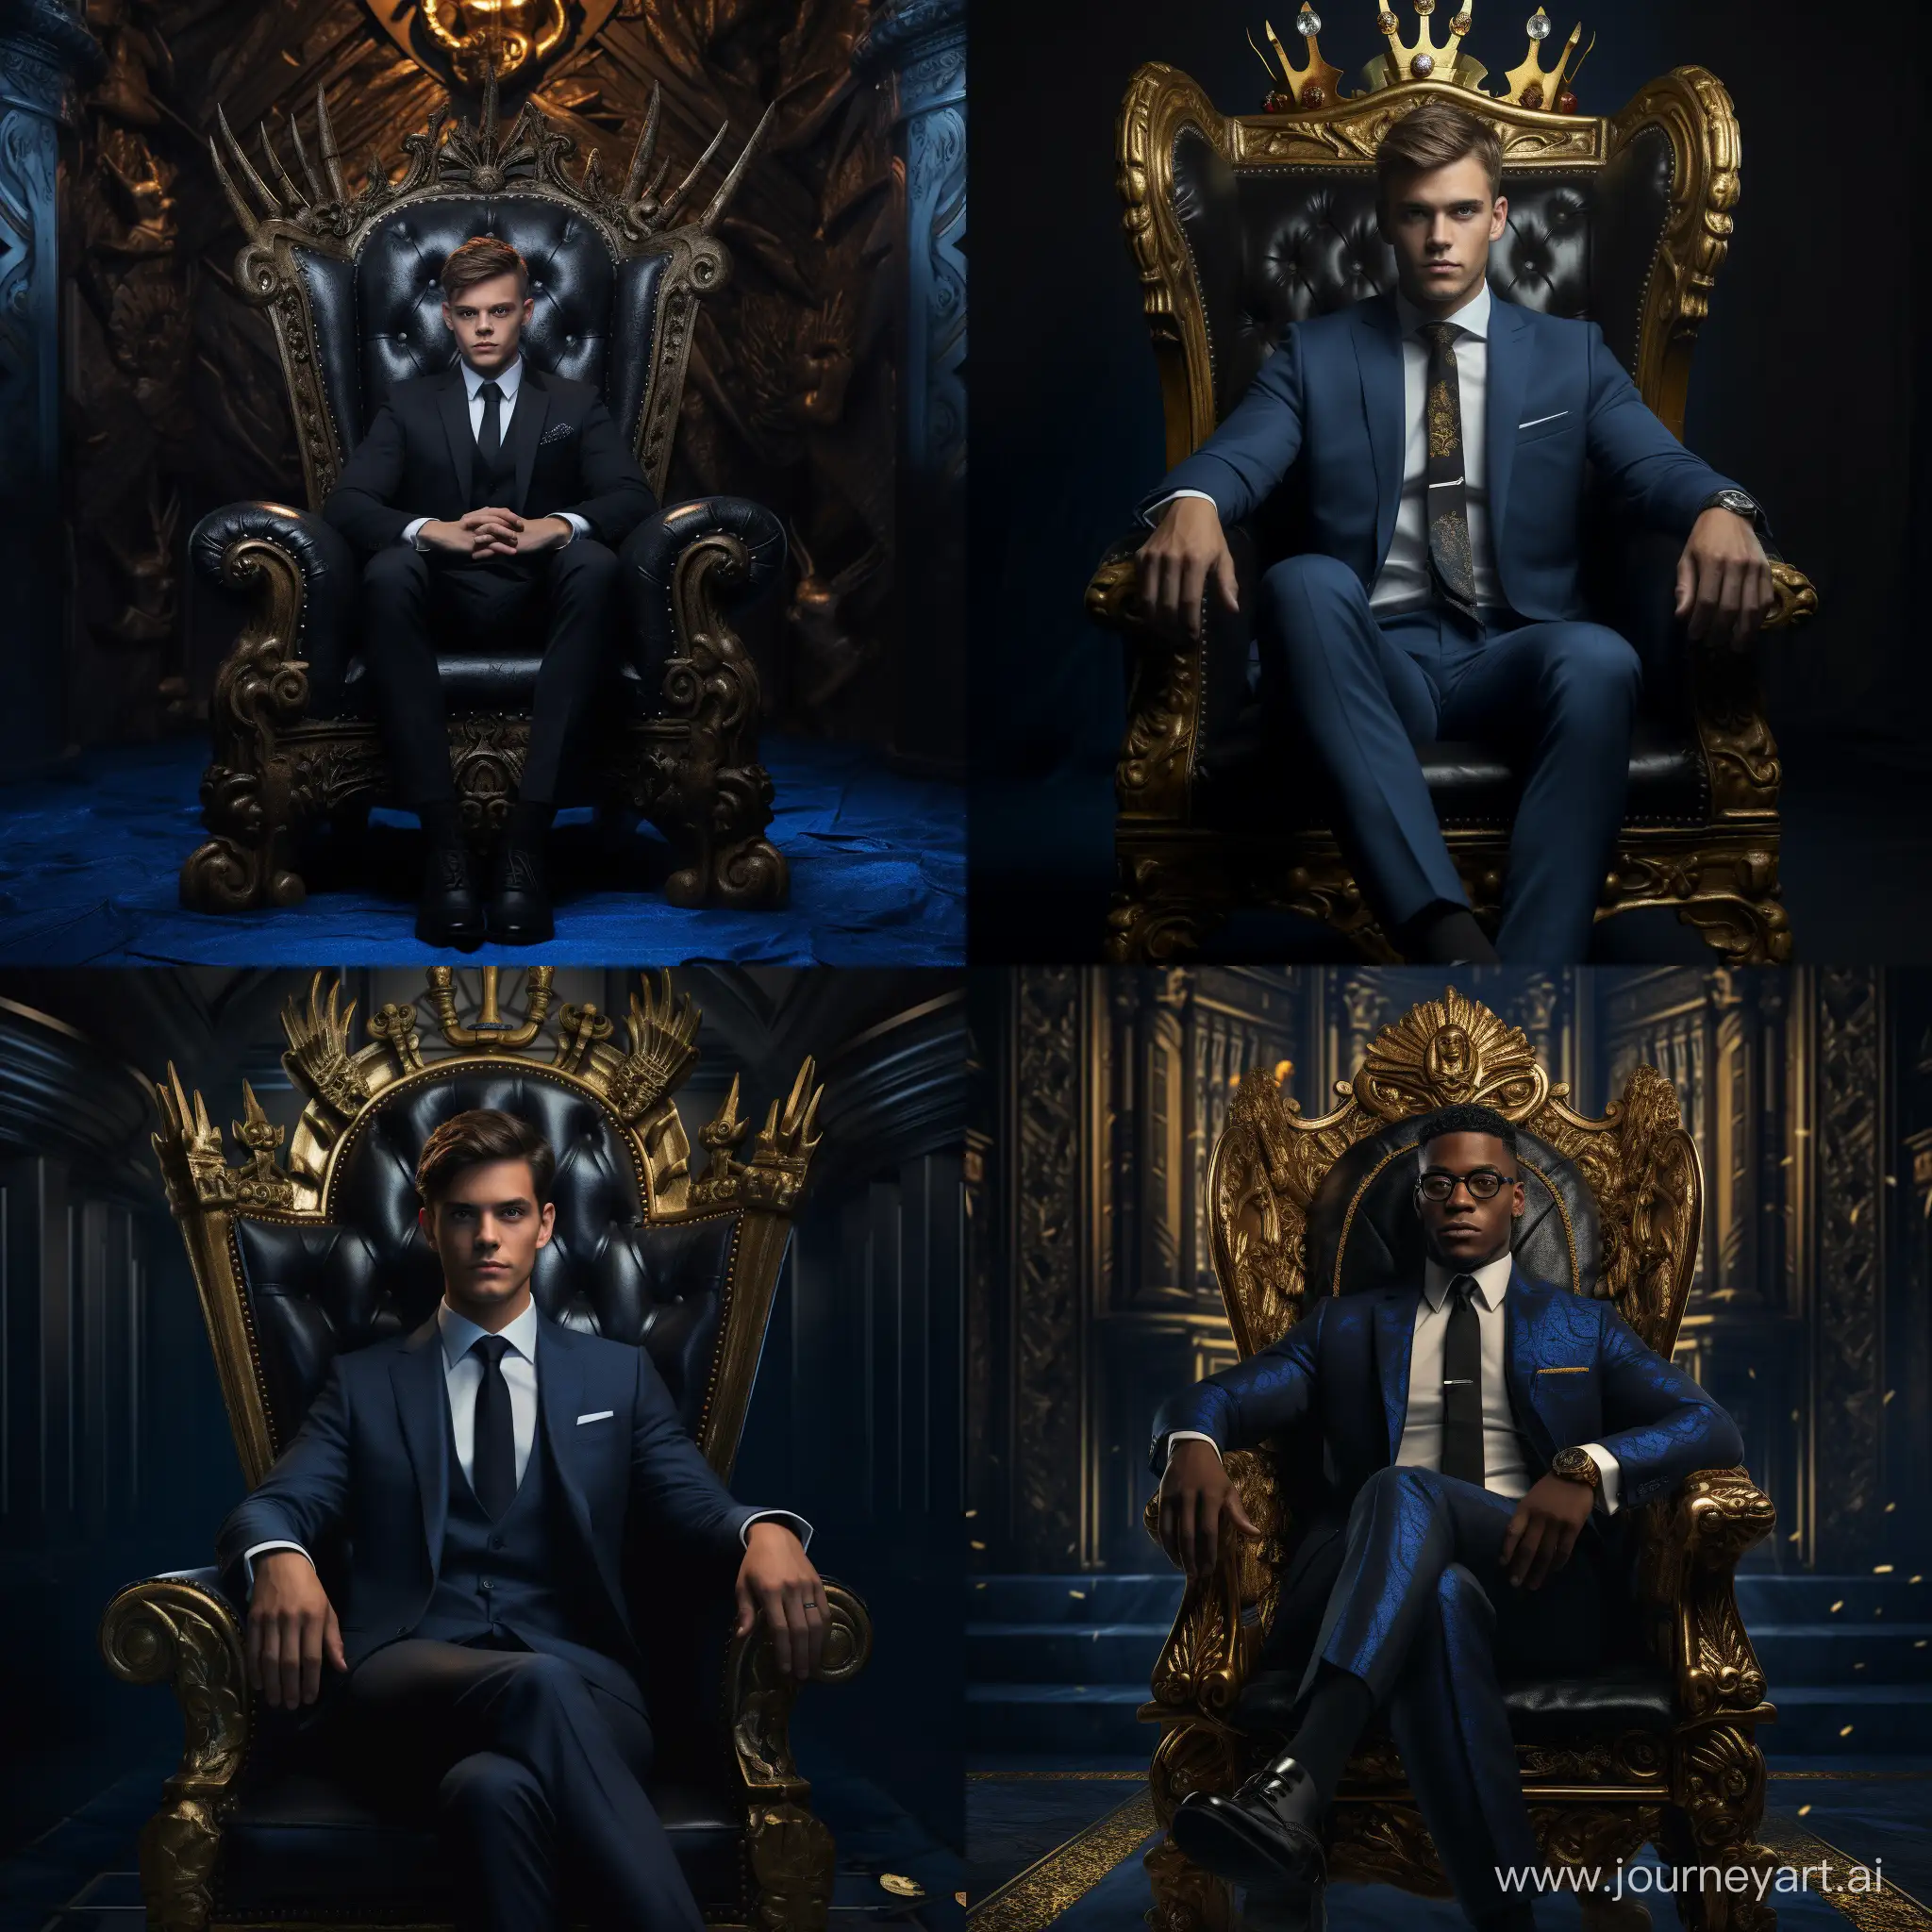 Regal-27YearOld-King-in-Blue-and-Black-Suit-on-Throne